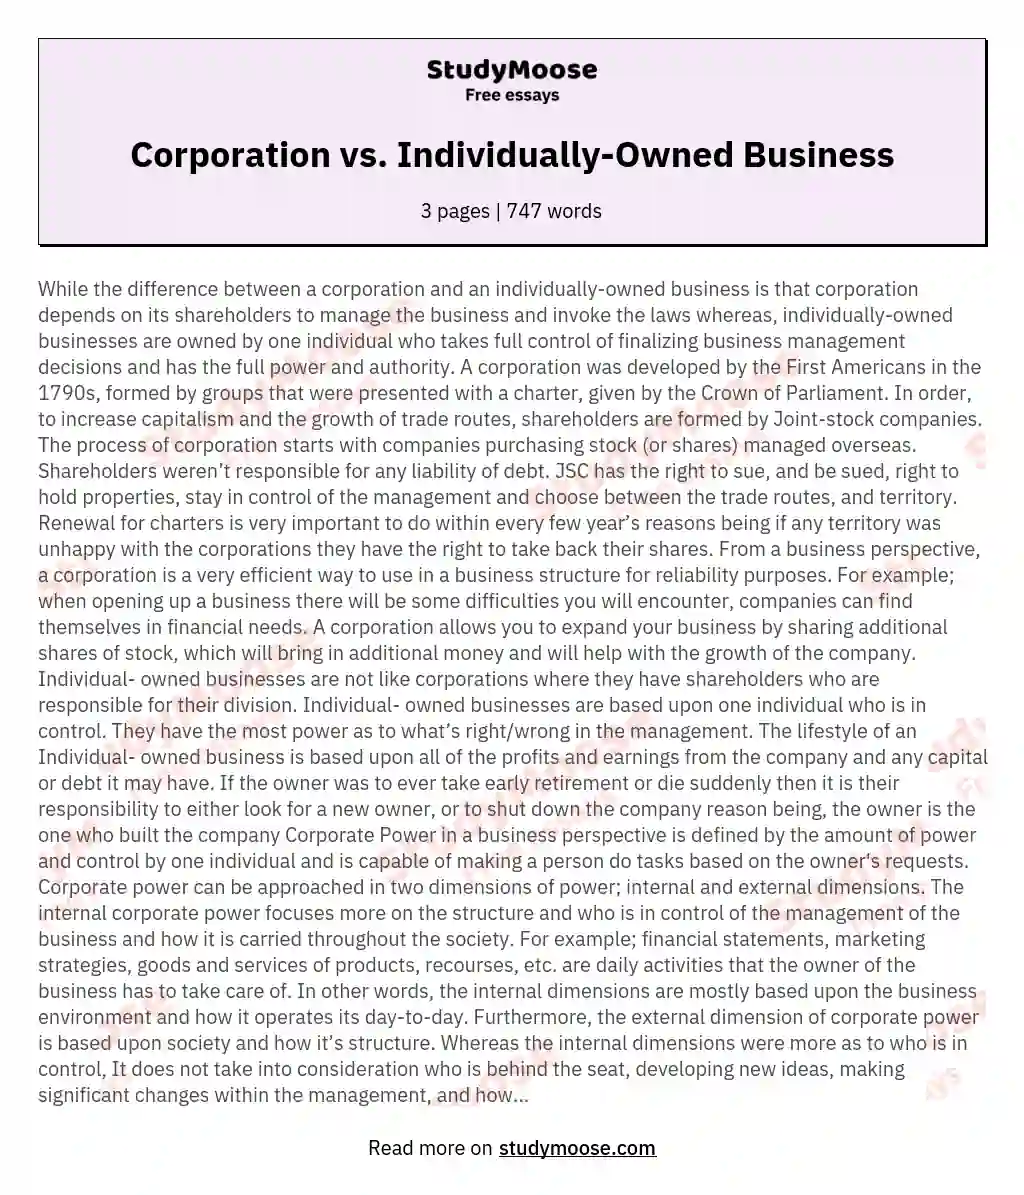 Corporation vs. Individually-Owned Business essay